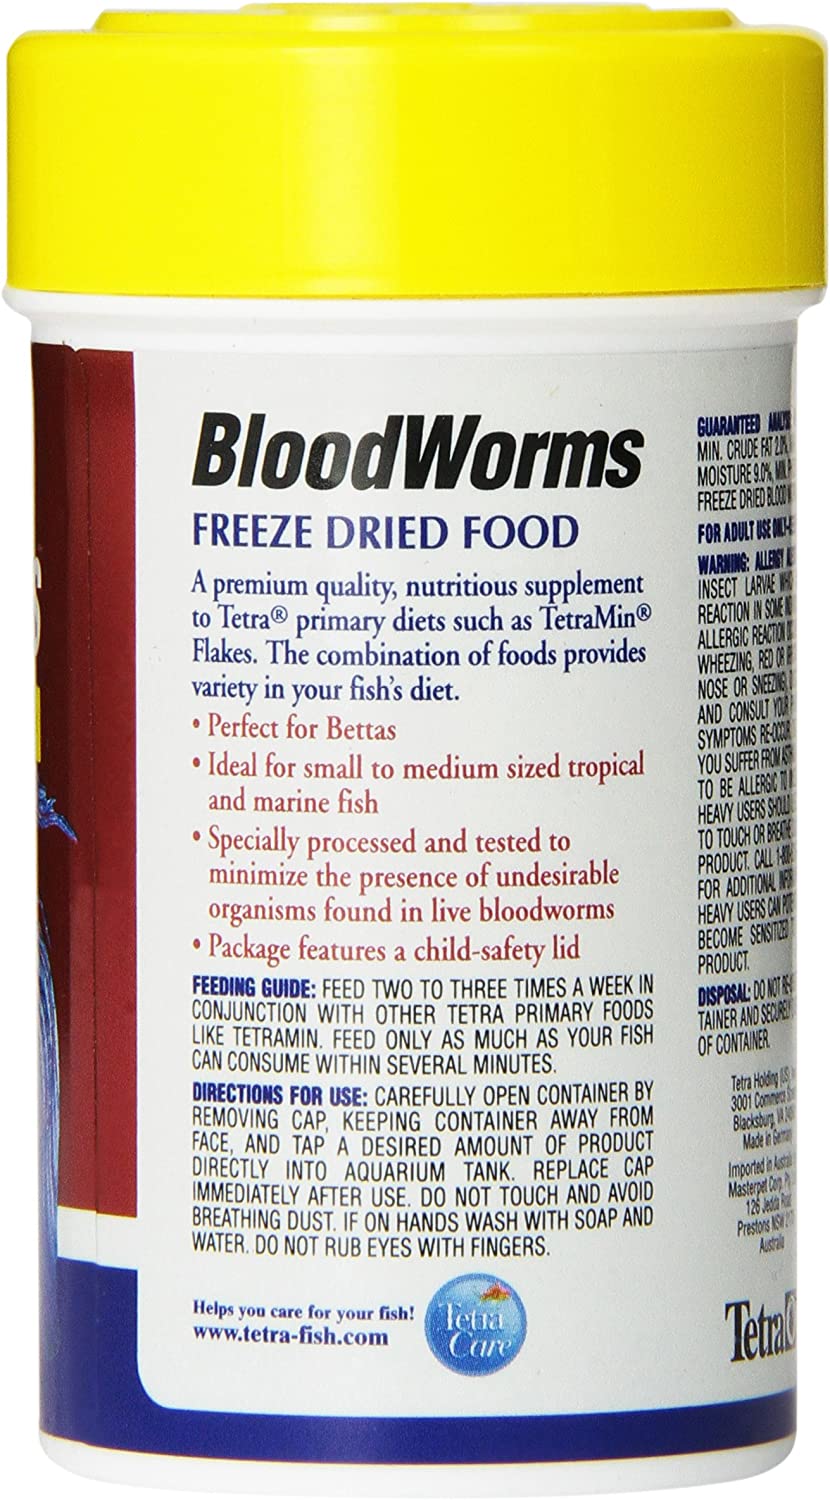 Tetra BloodWorms, Freeze-Dried Food for Freshwater and Saltwater Fish